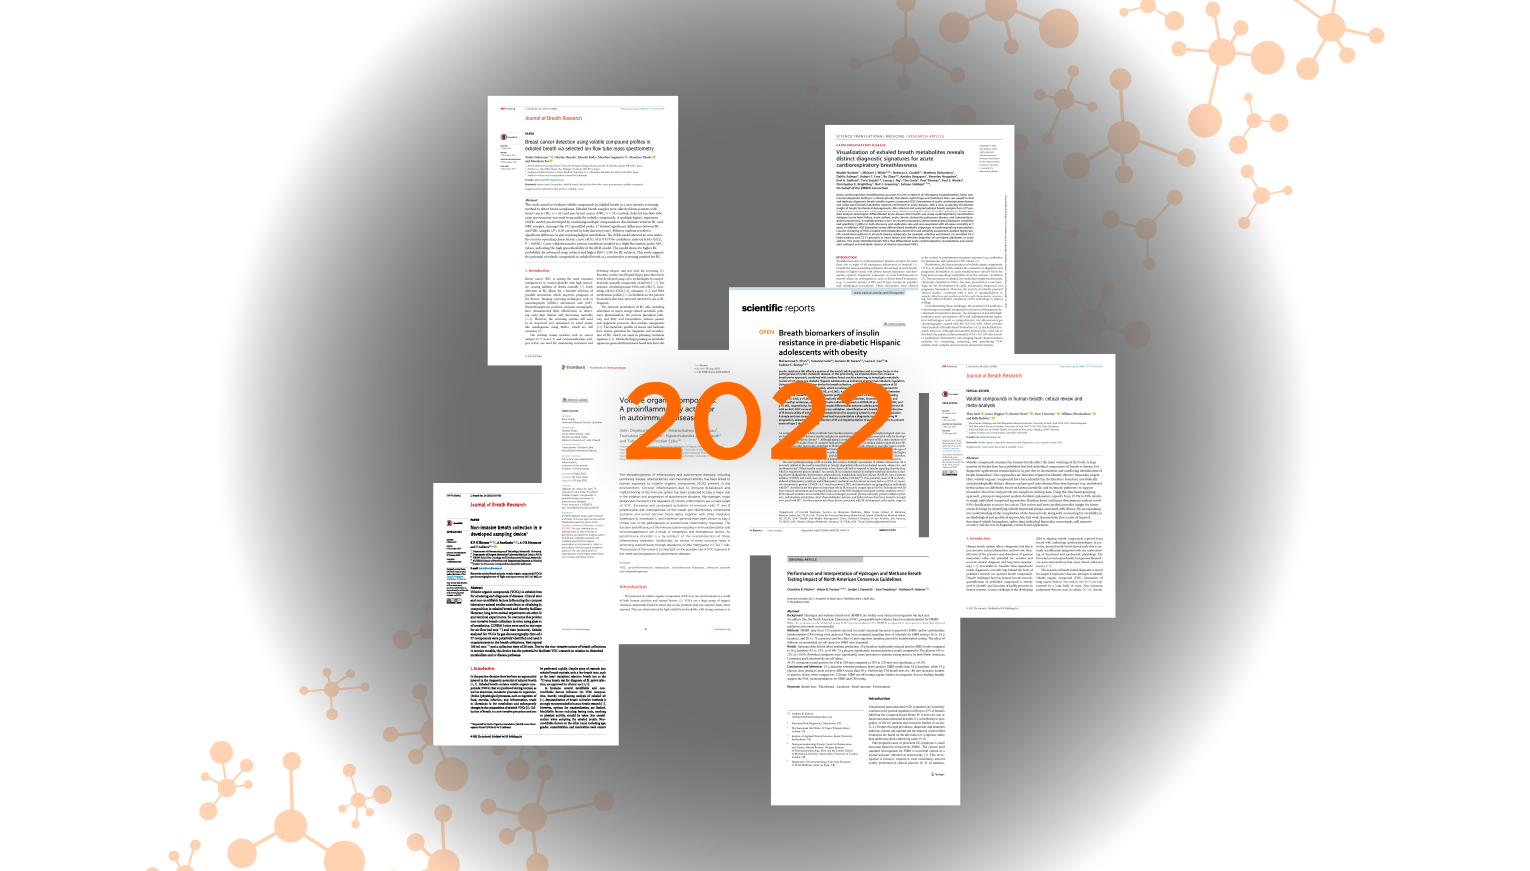 A collection of the cover pages of best papers published in 2022